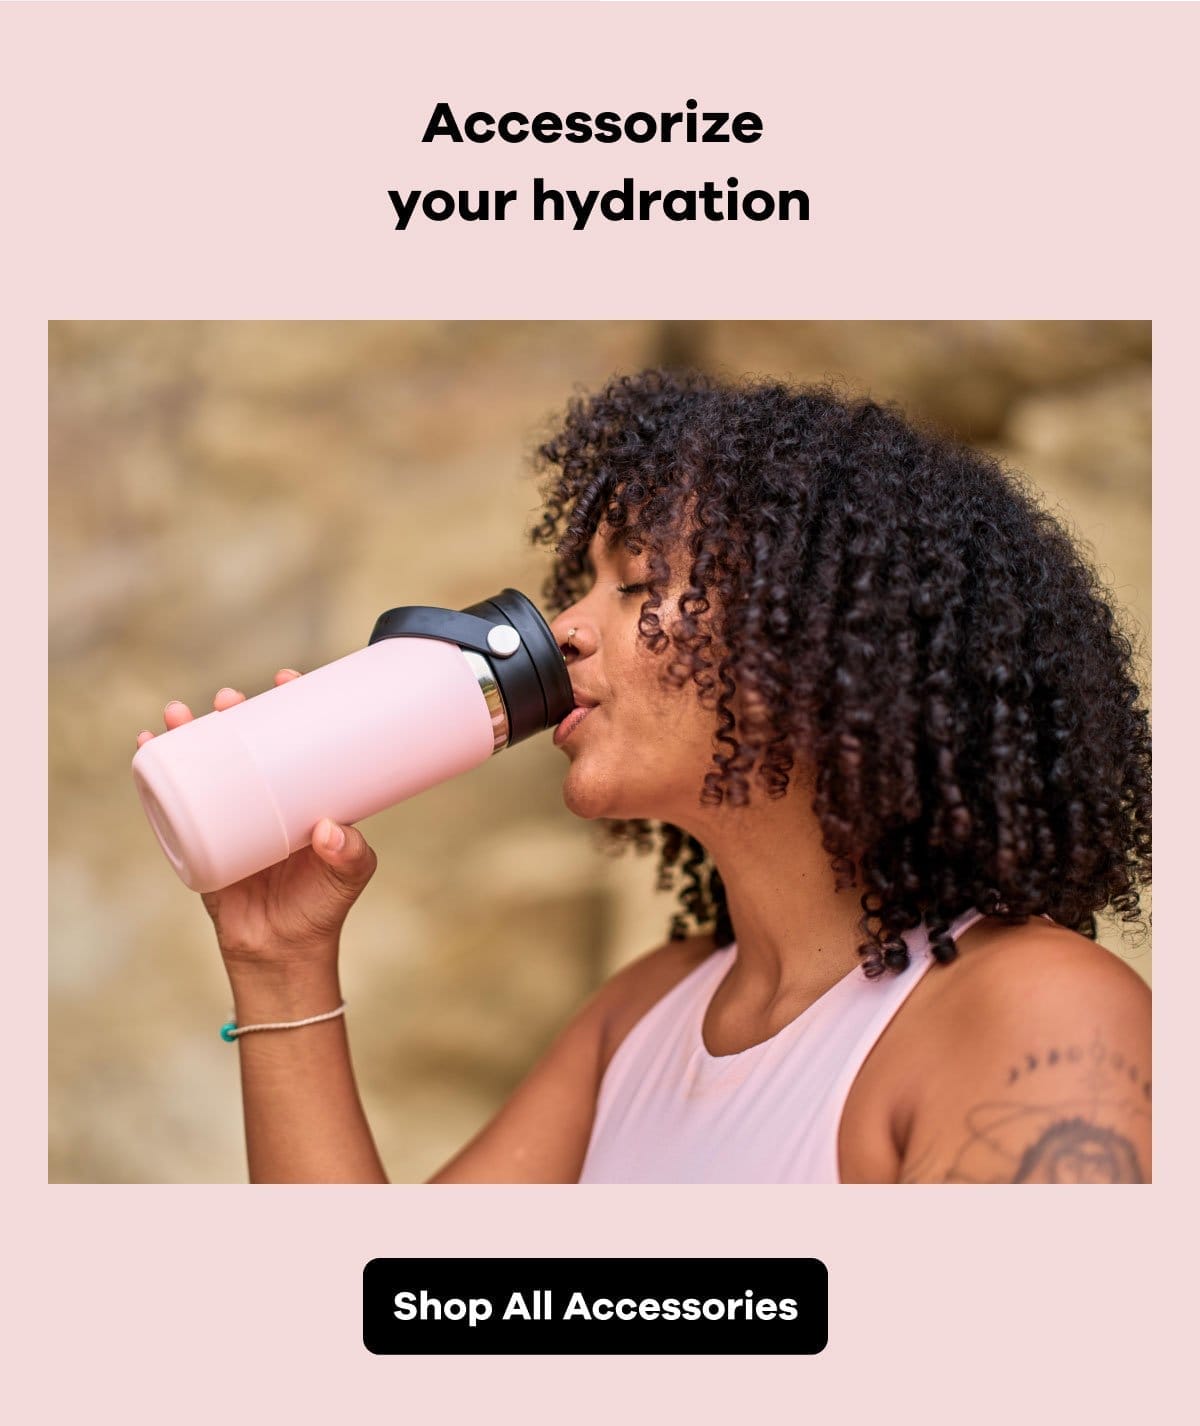 Accessorize your hydration | Shop All Accessories